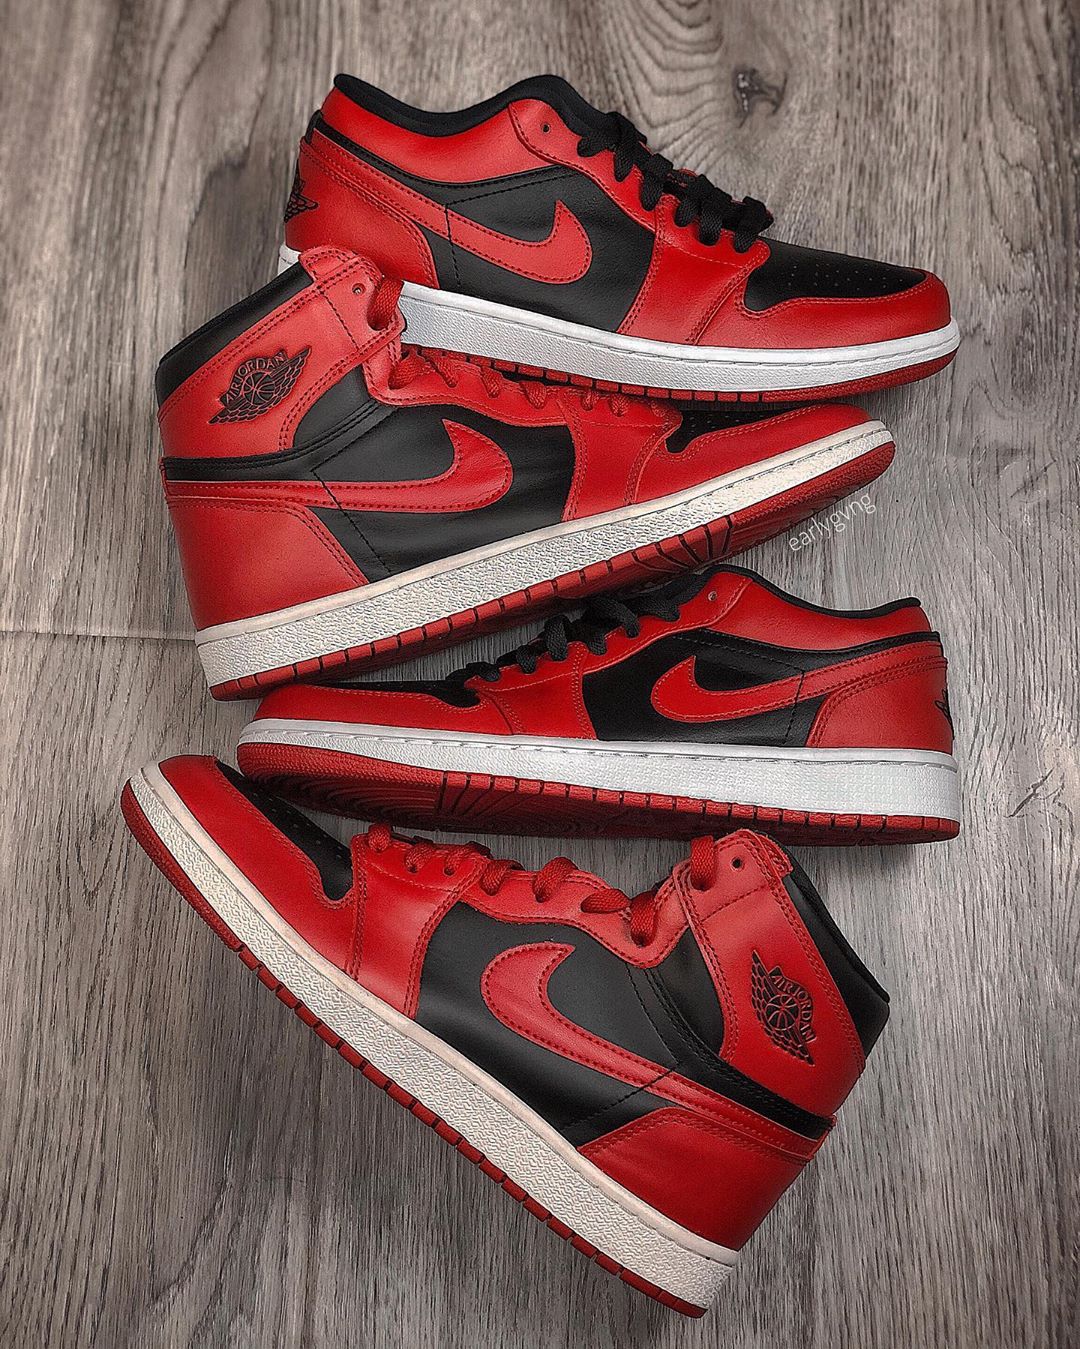 Official Images // Air Jordan 1 Low "Varsity Red" | HOUSE OF HEAT